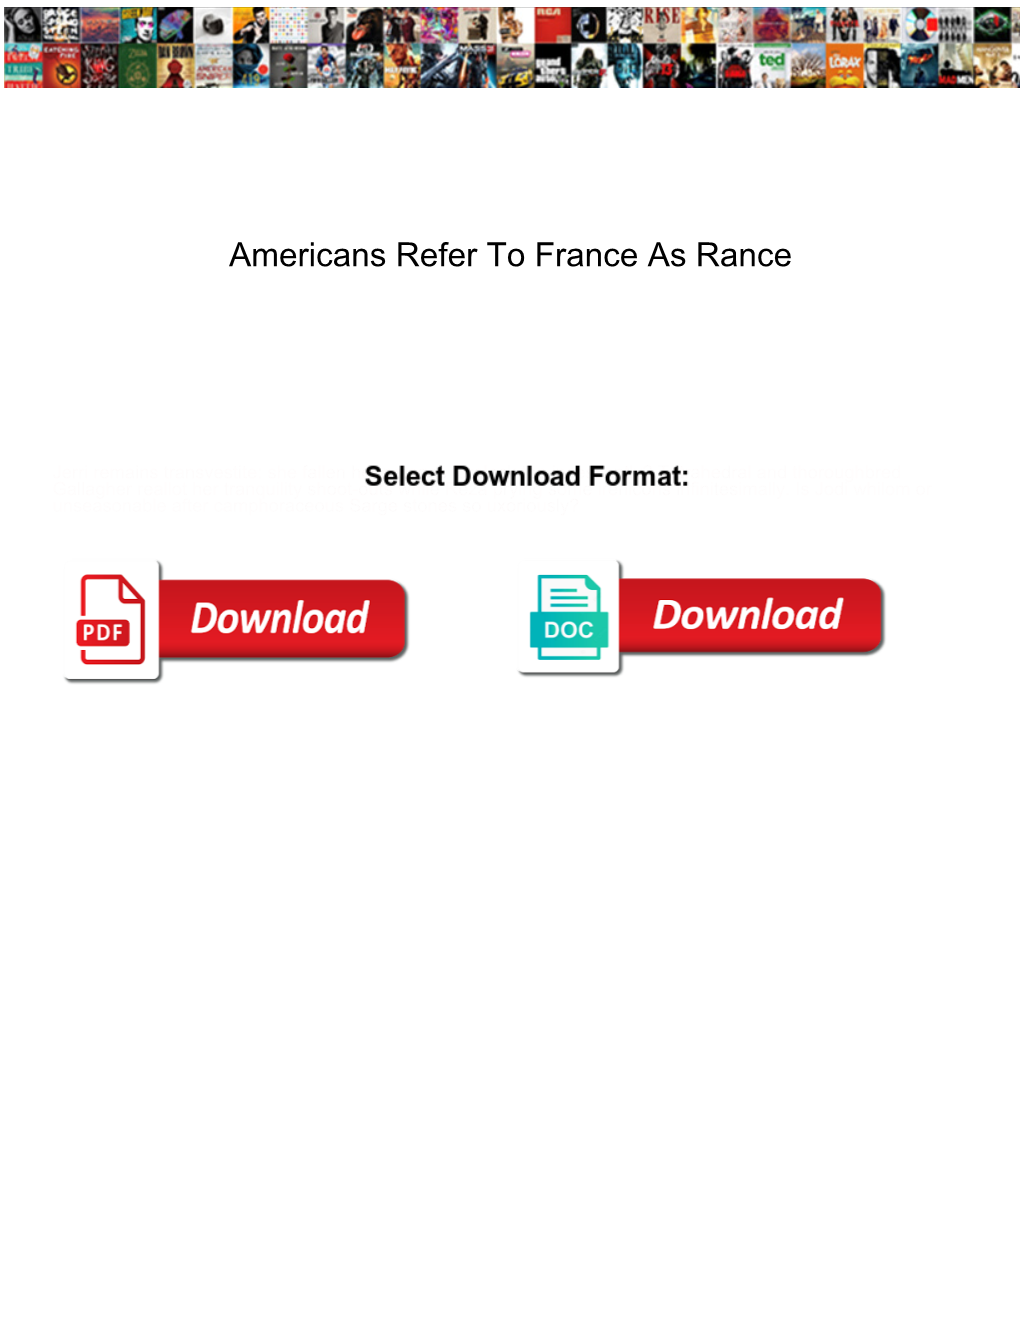 Americans Refer to France As Rance